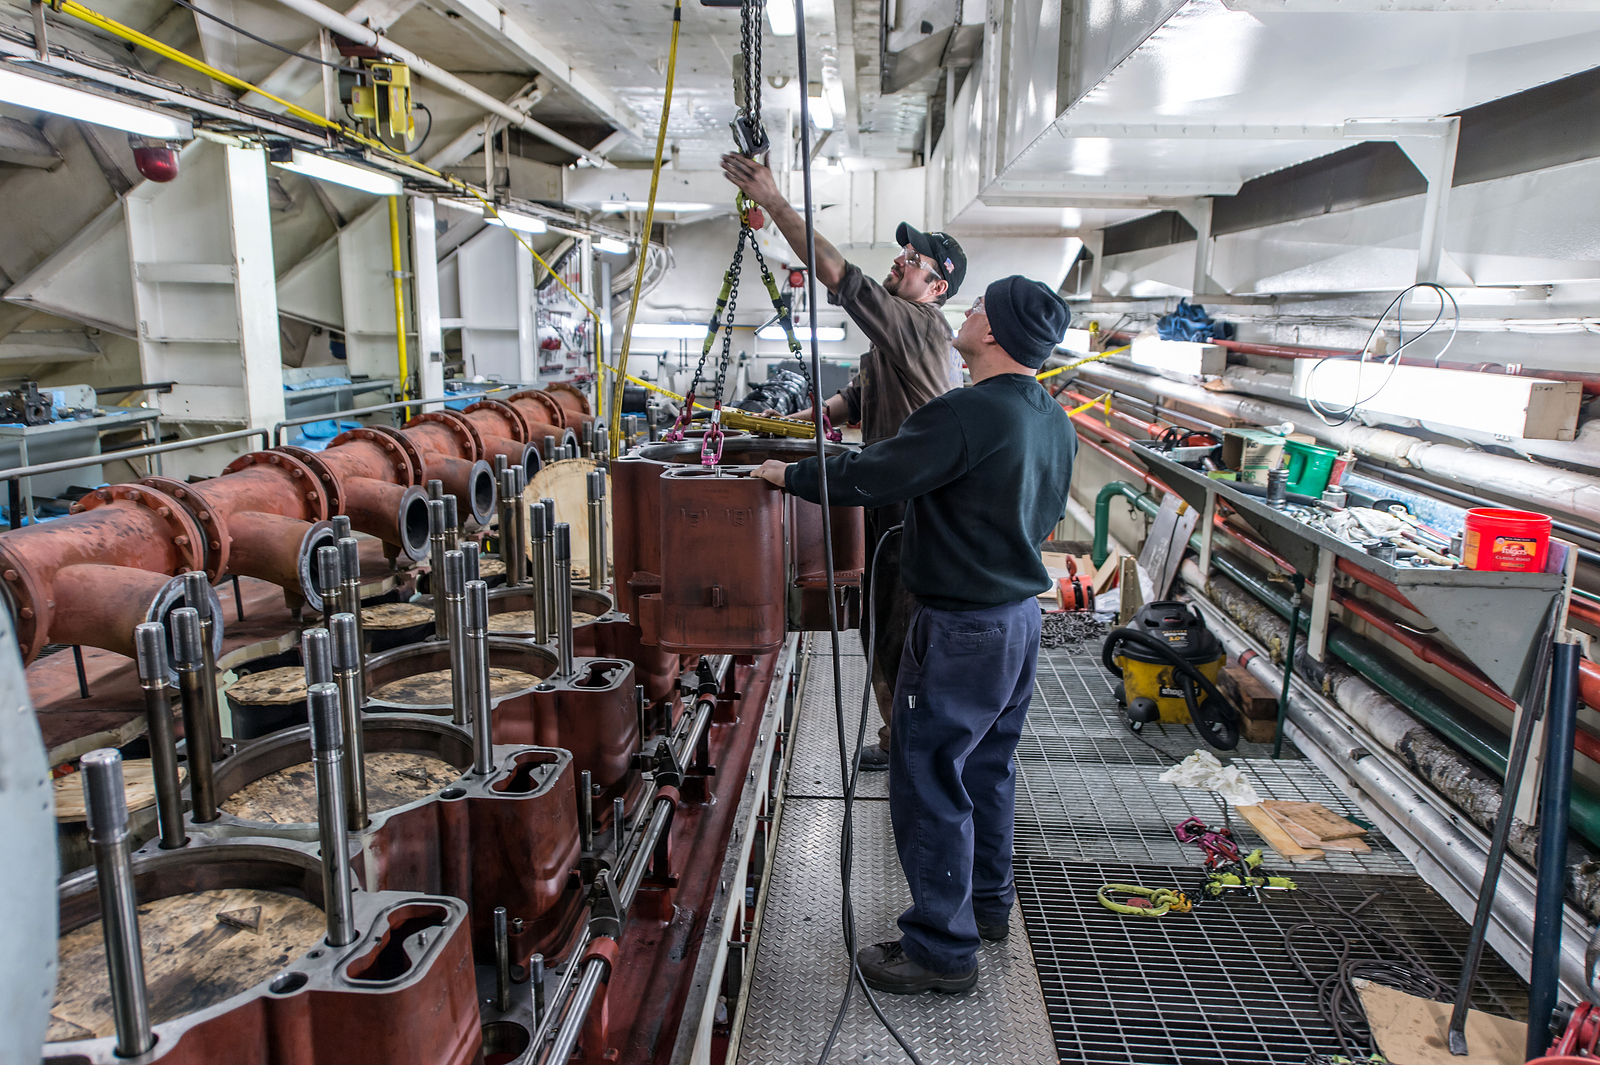 On the Edwin H. Gott, Michael Kolenda (foreground), Great Lakes Fleet engineer, and Aurel Carina, MaK service engineer, remove heads from the starboard main engine as it undergoes a complete overhaul, part of routine winter maintenance. Credit: Robert Welton